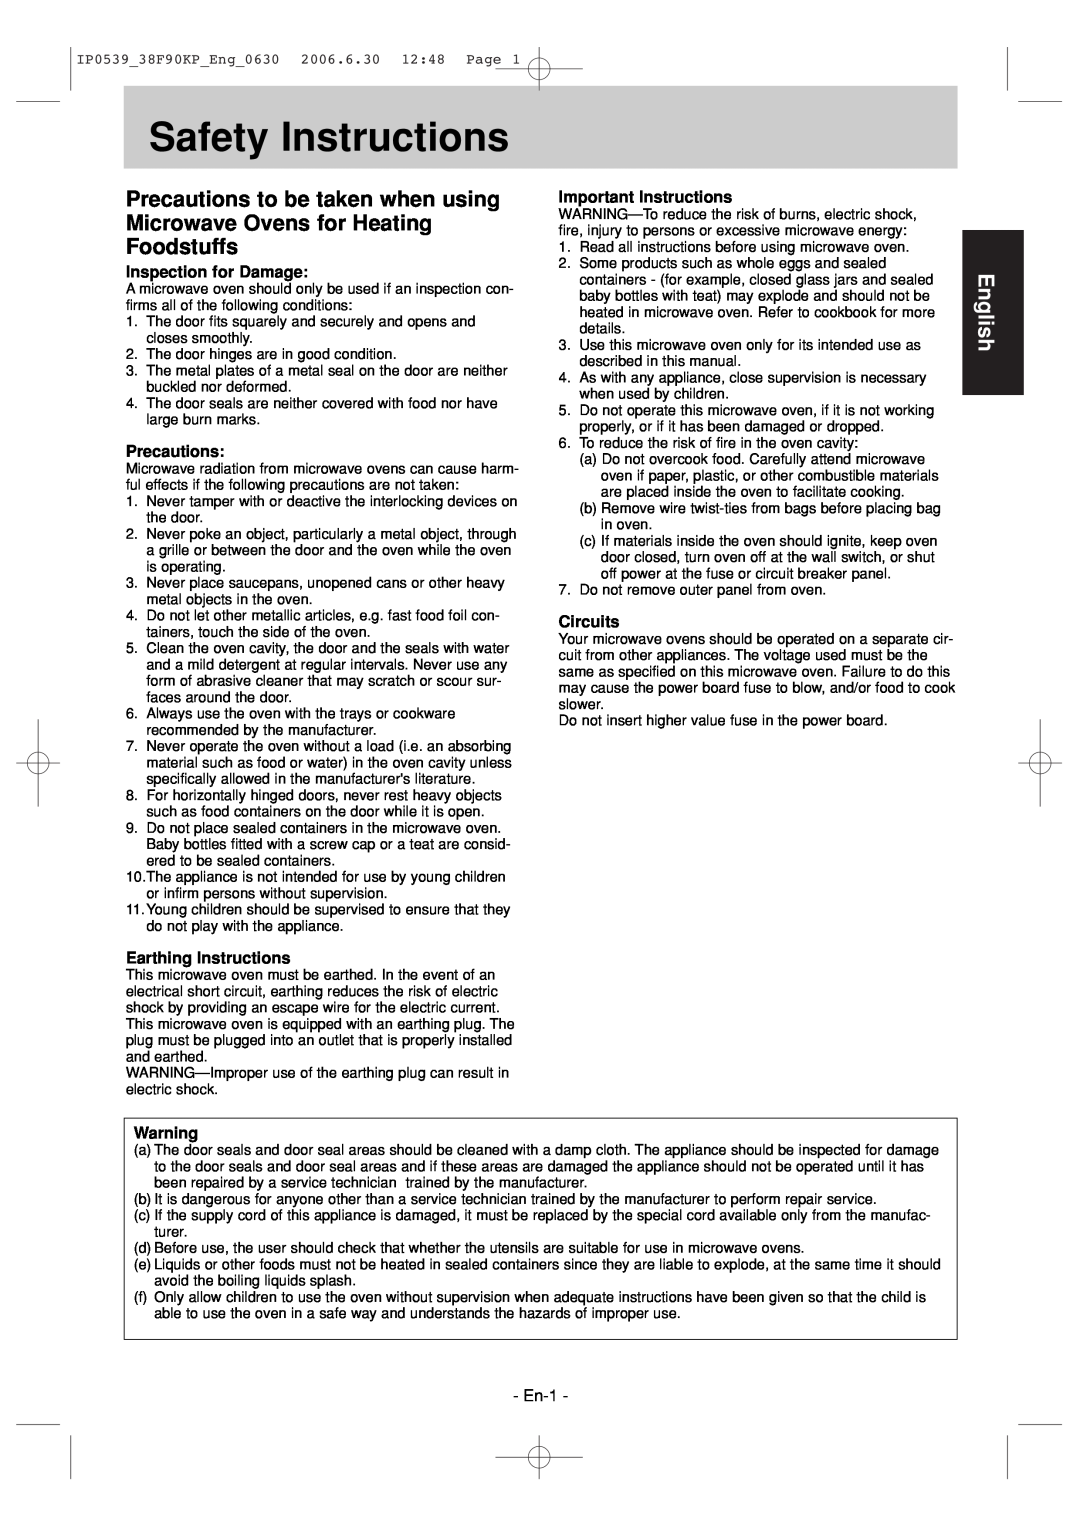 Panasonic NN-ST656W Safety Instructions, English, Inspection for Damage, Precautions, Important Instructions, Circuits 